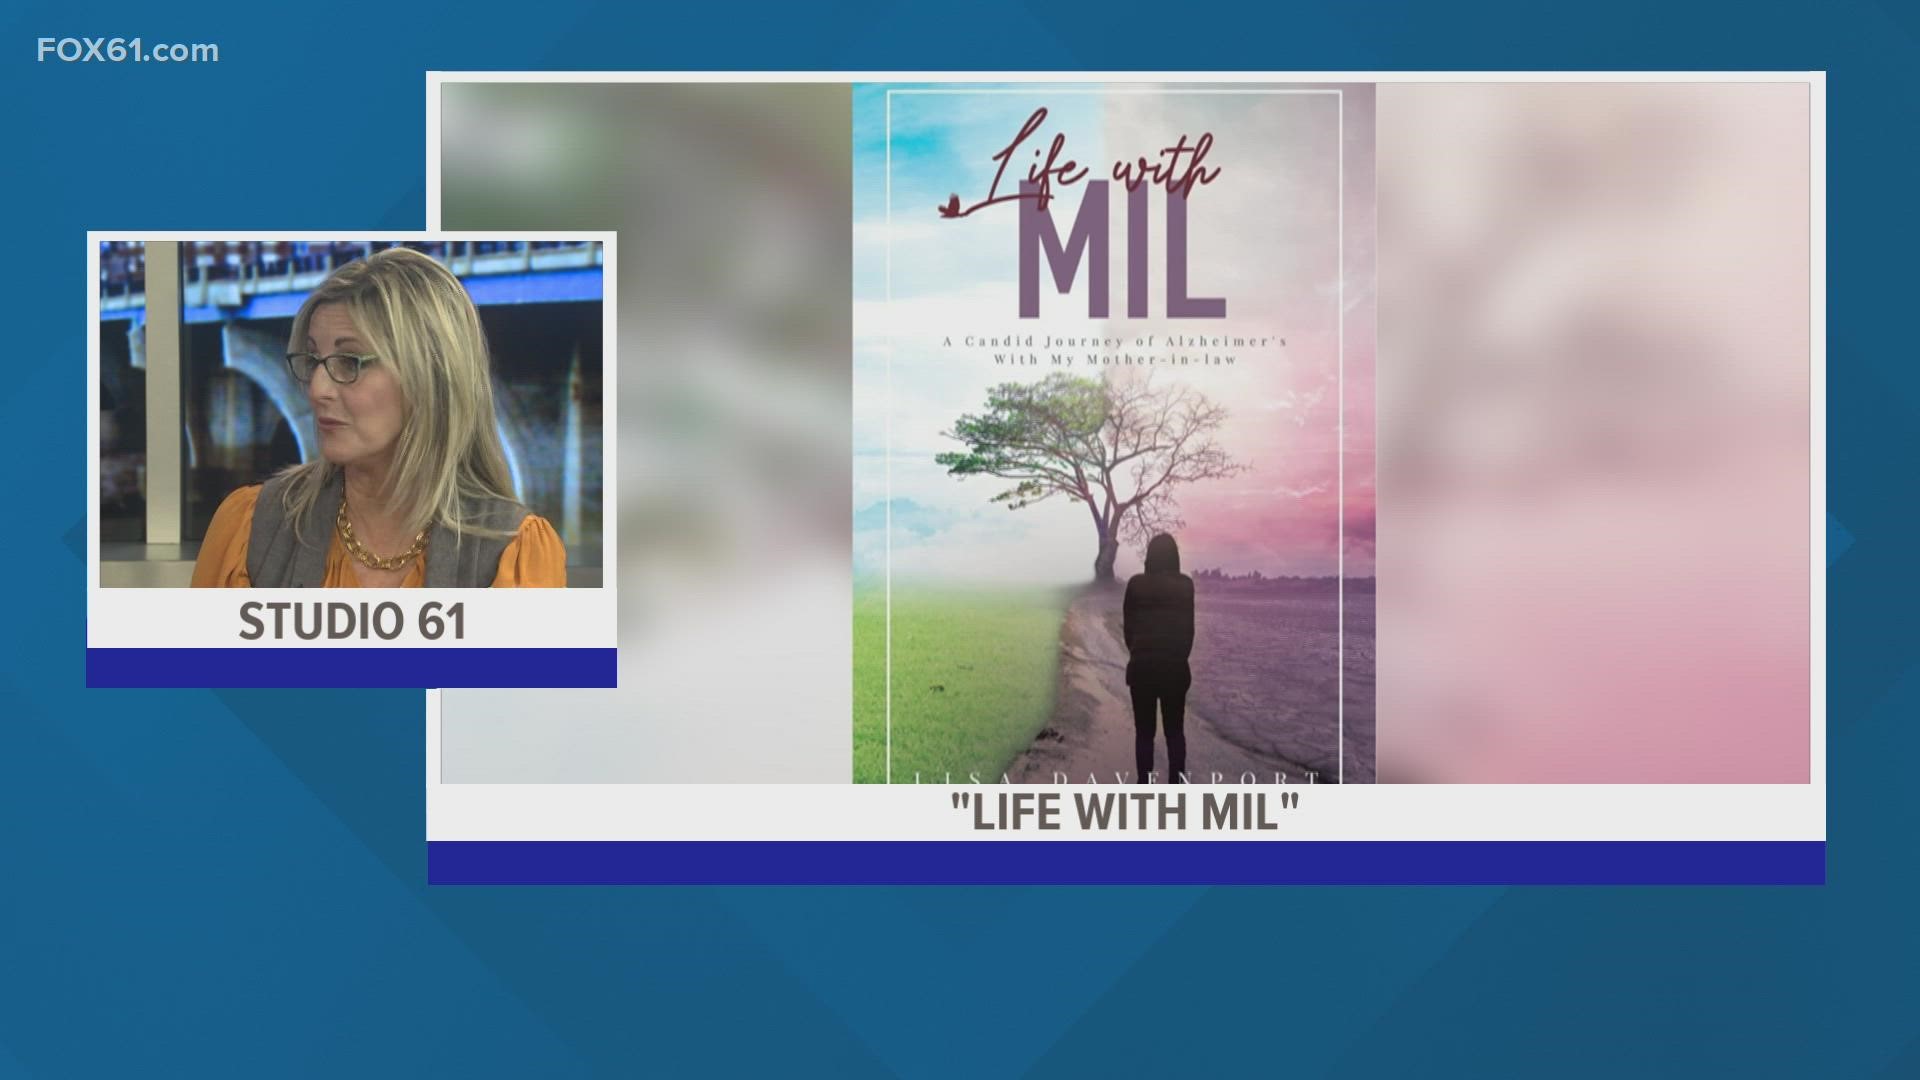 Author of "Life with MIL" Lisa Davenport visited Studio61 to discuss the relationship she had with her mother-in-law, who was living with Alzheimer's.